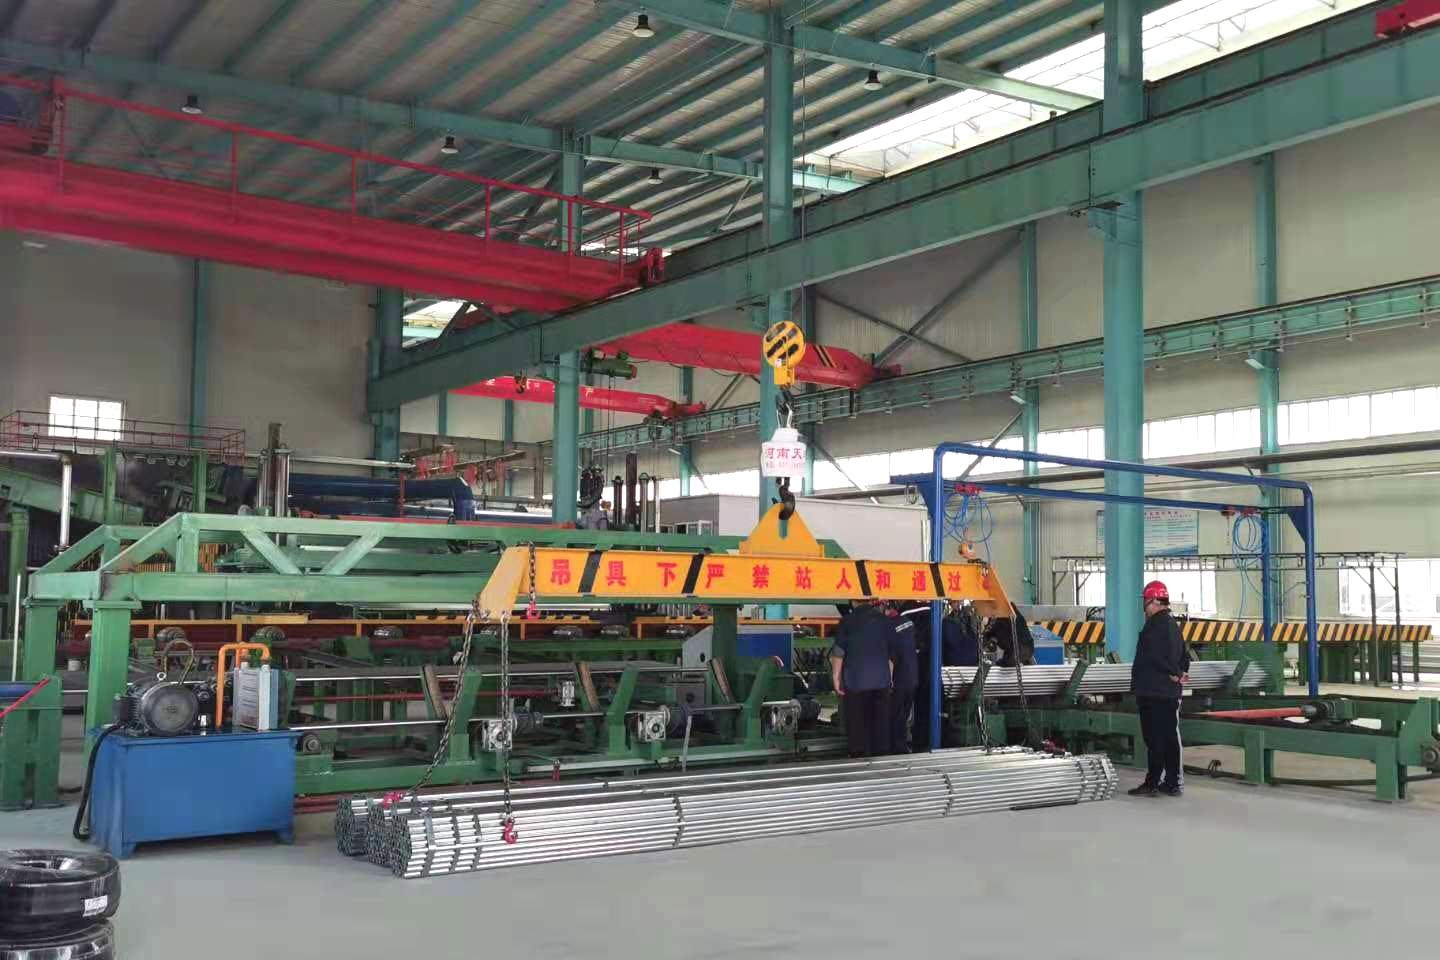 First hot dipped galvanizing line of Jianlong Steel put into production